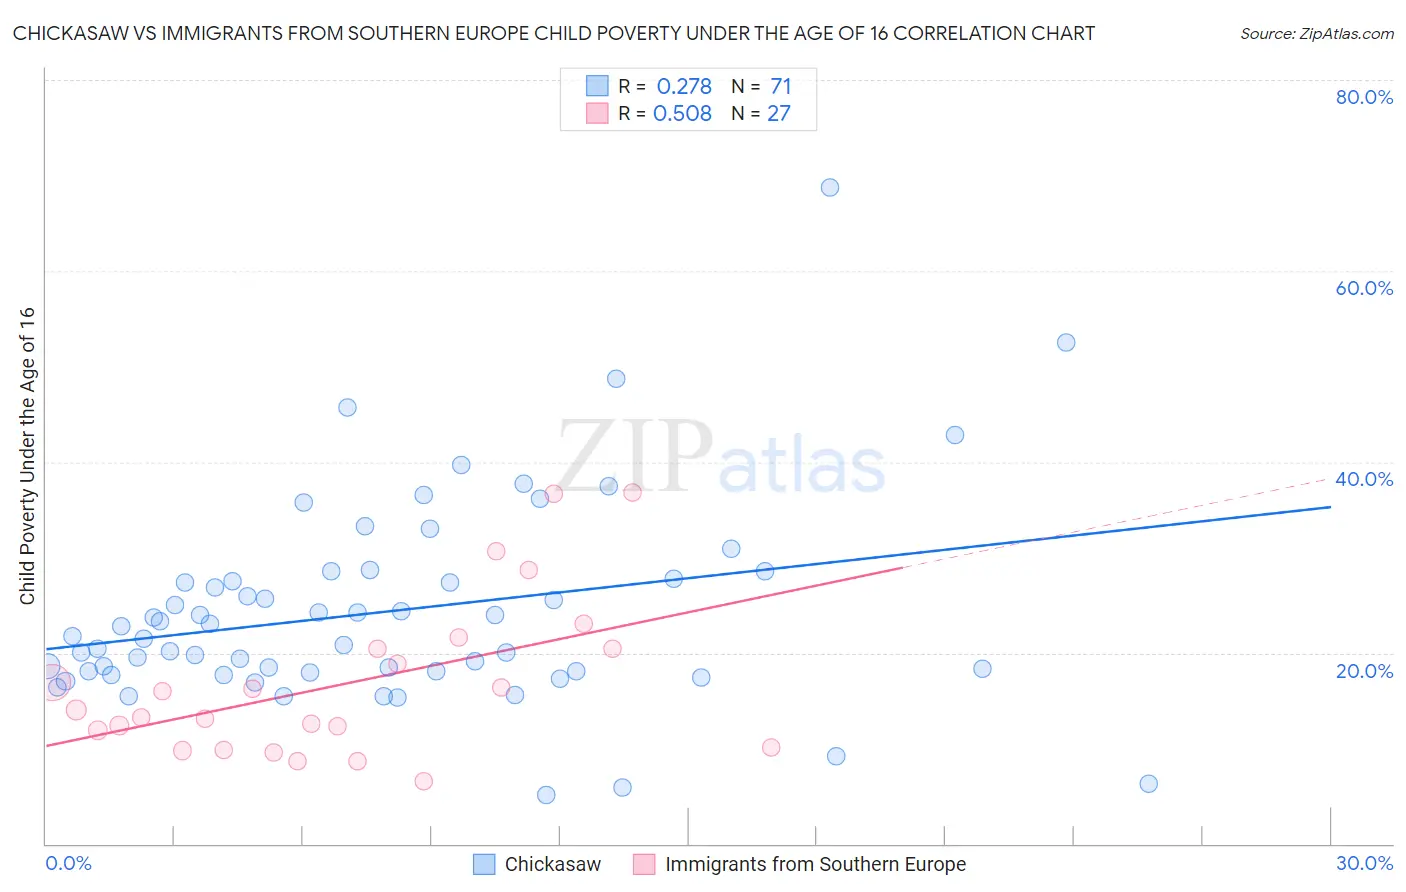 Chickasaw vs Immigrants from Southern Europe Child Poverty Under the Age of 16